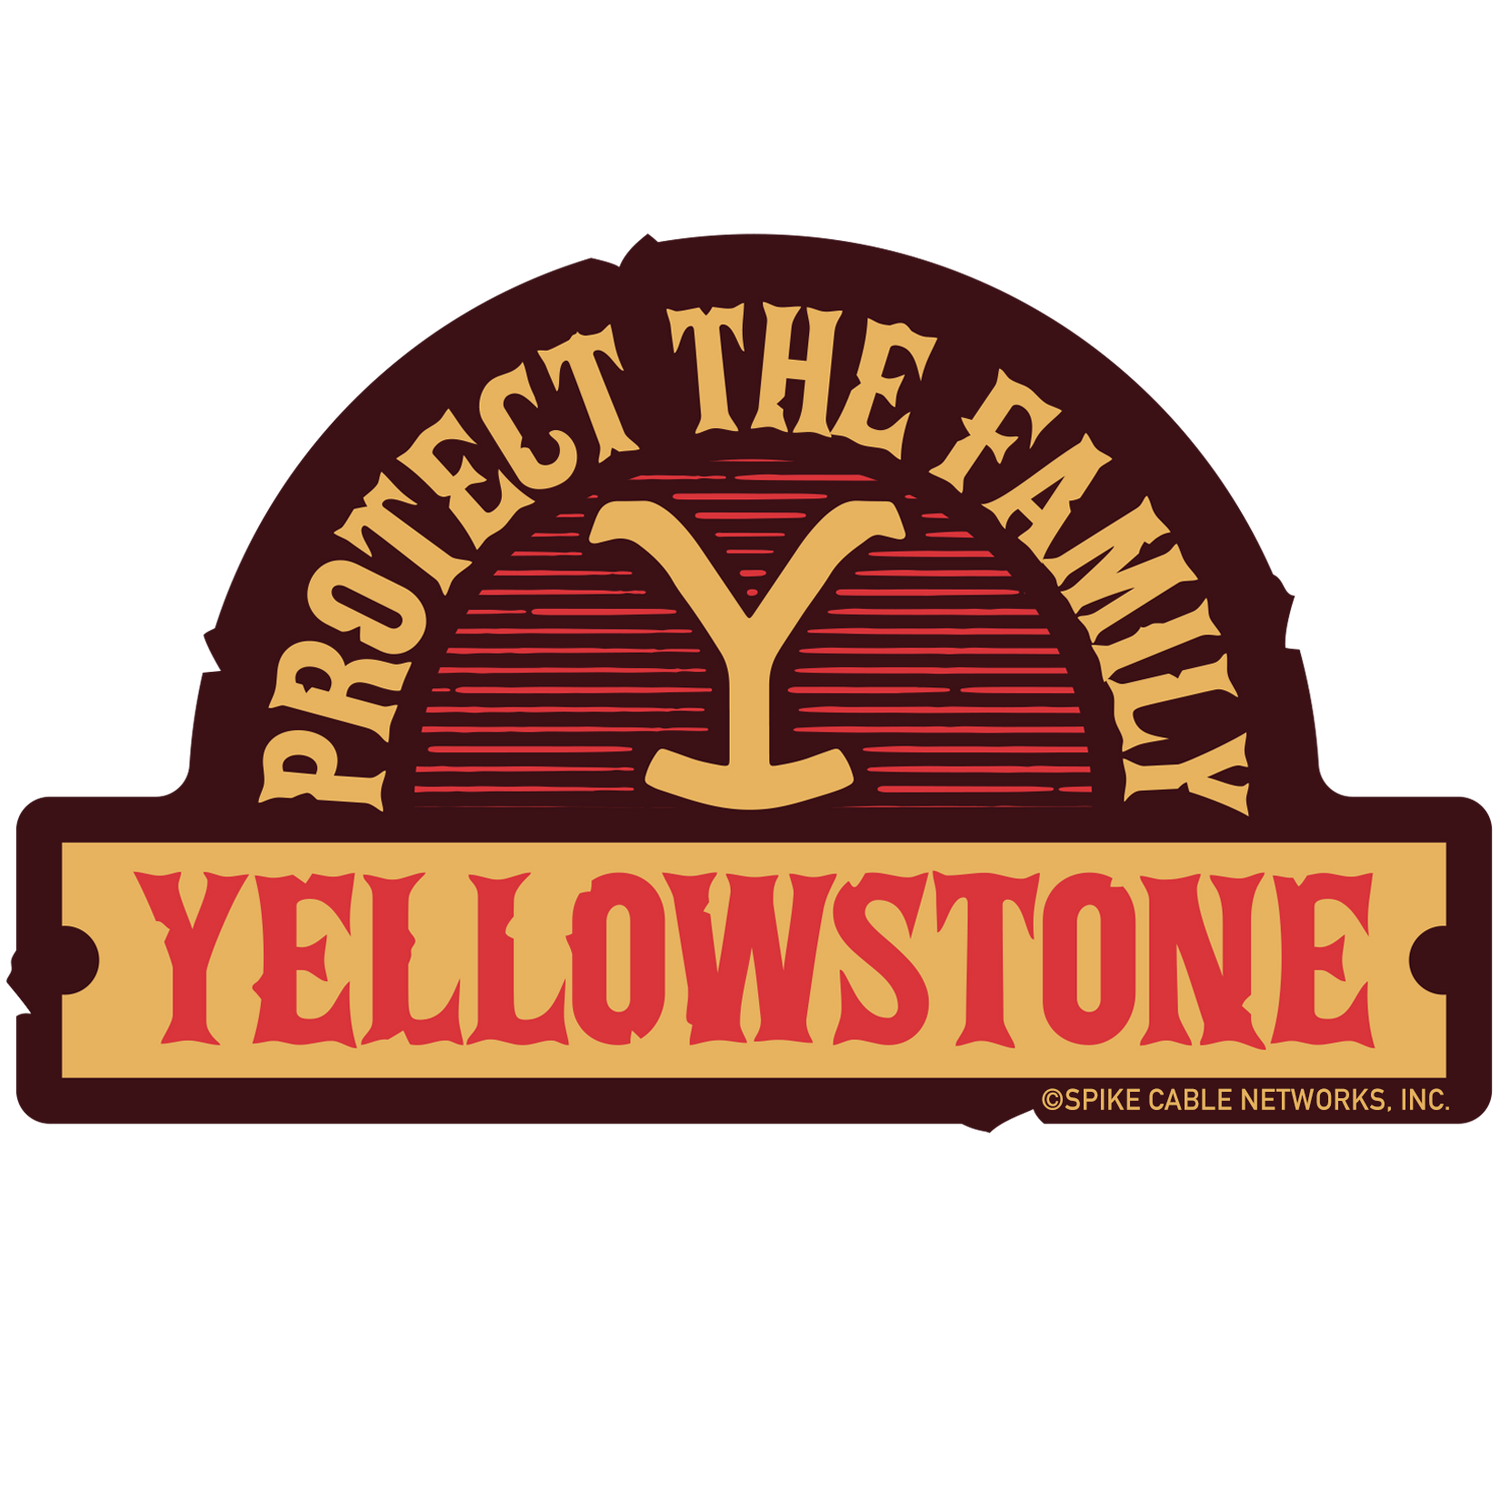 Yellowstone Assorted Patches Sticker Pack of 3